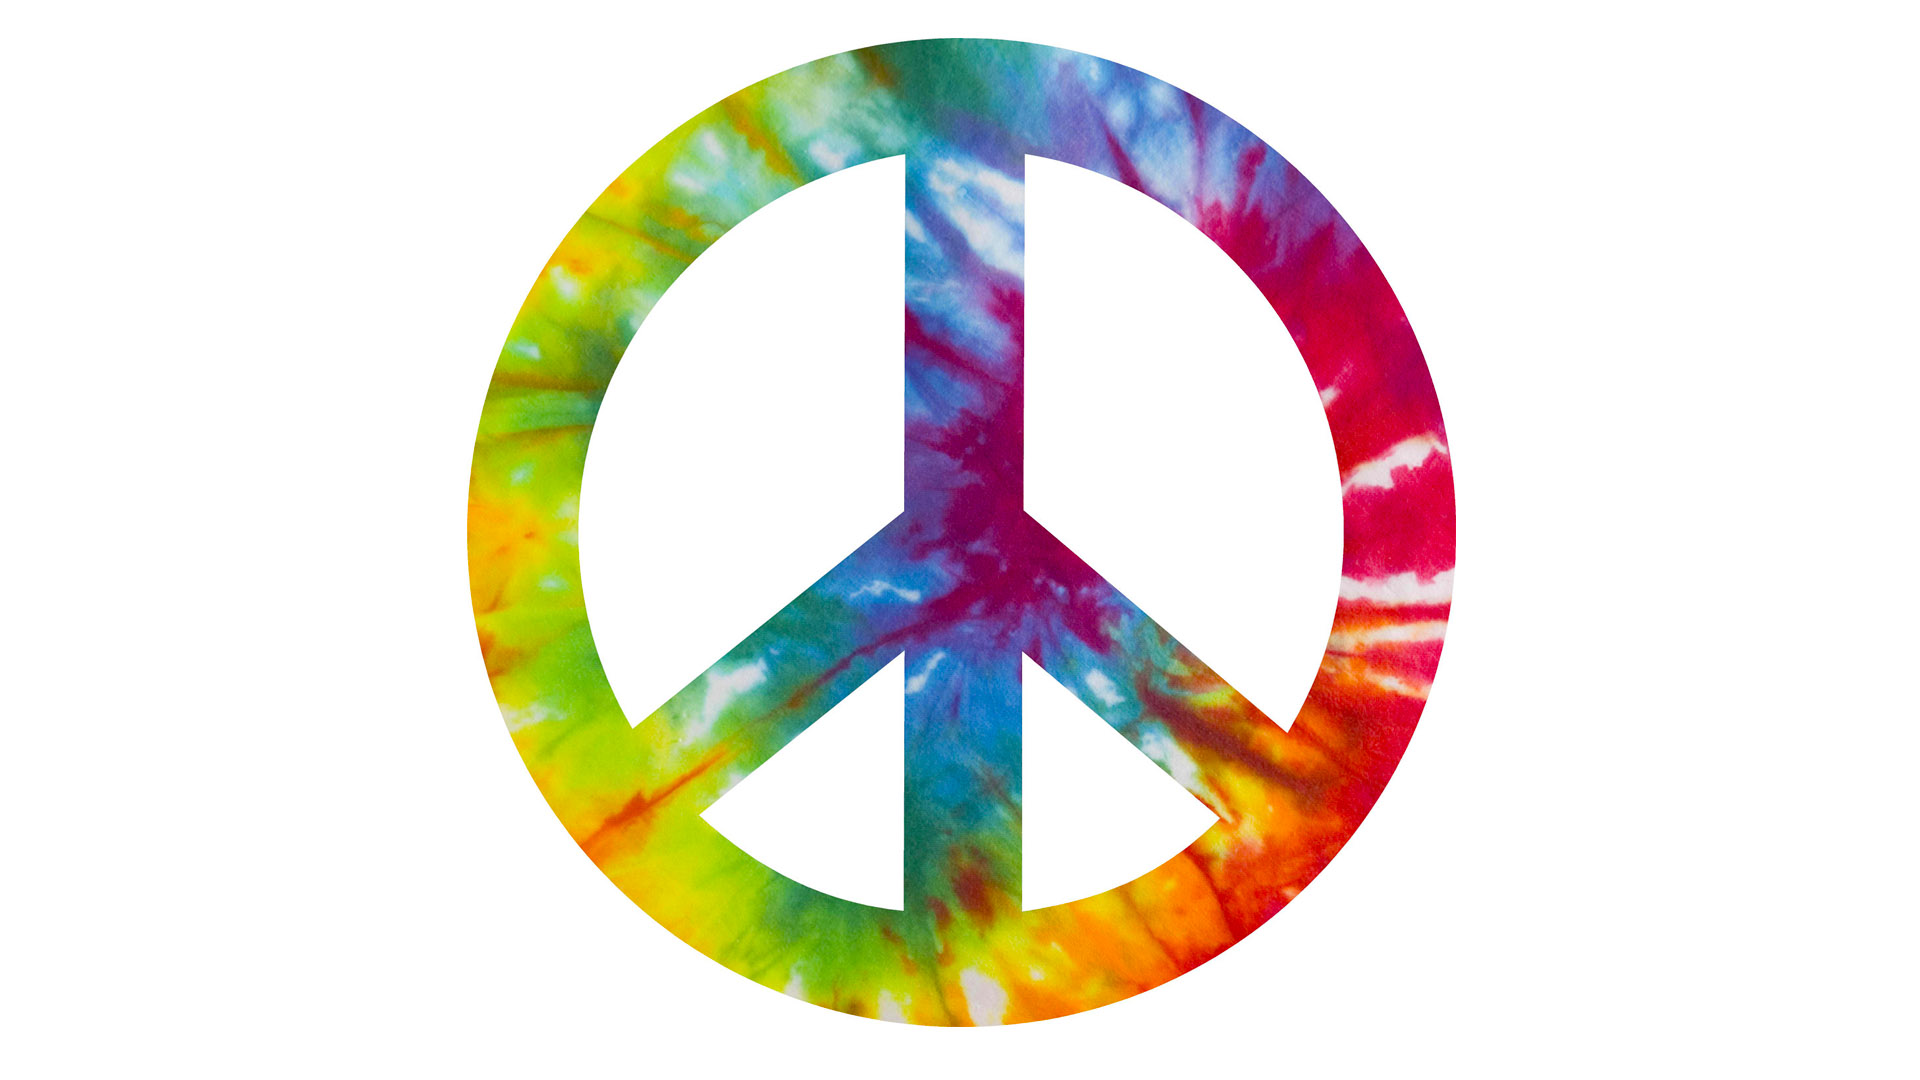 Wallpaper peace and love